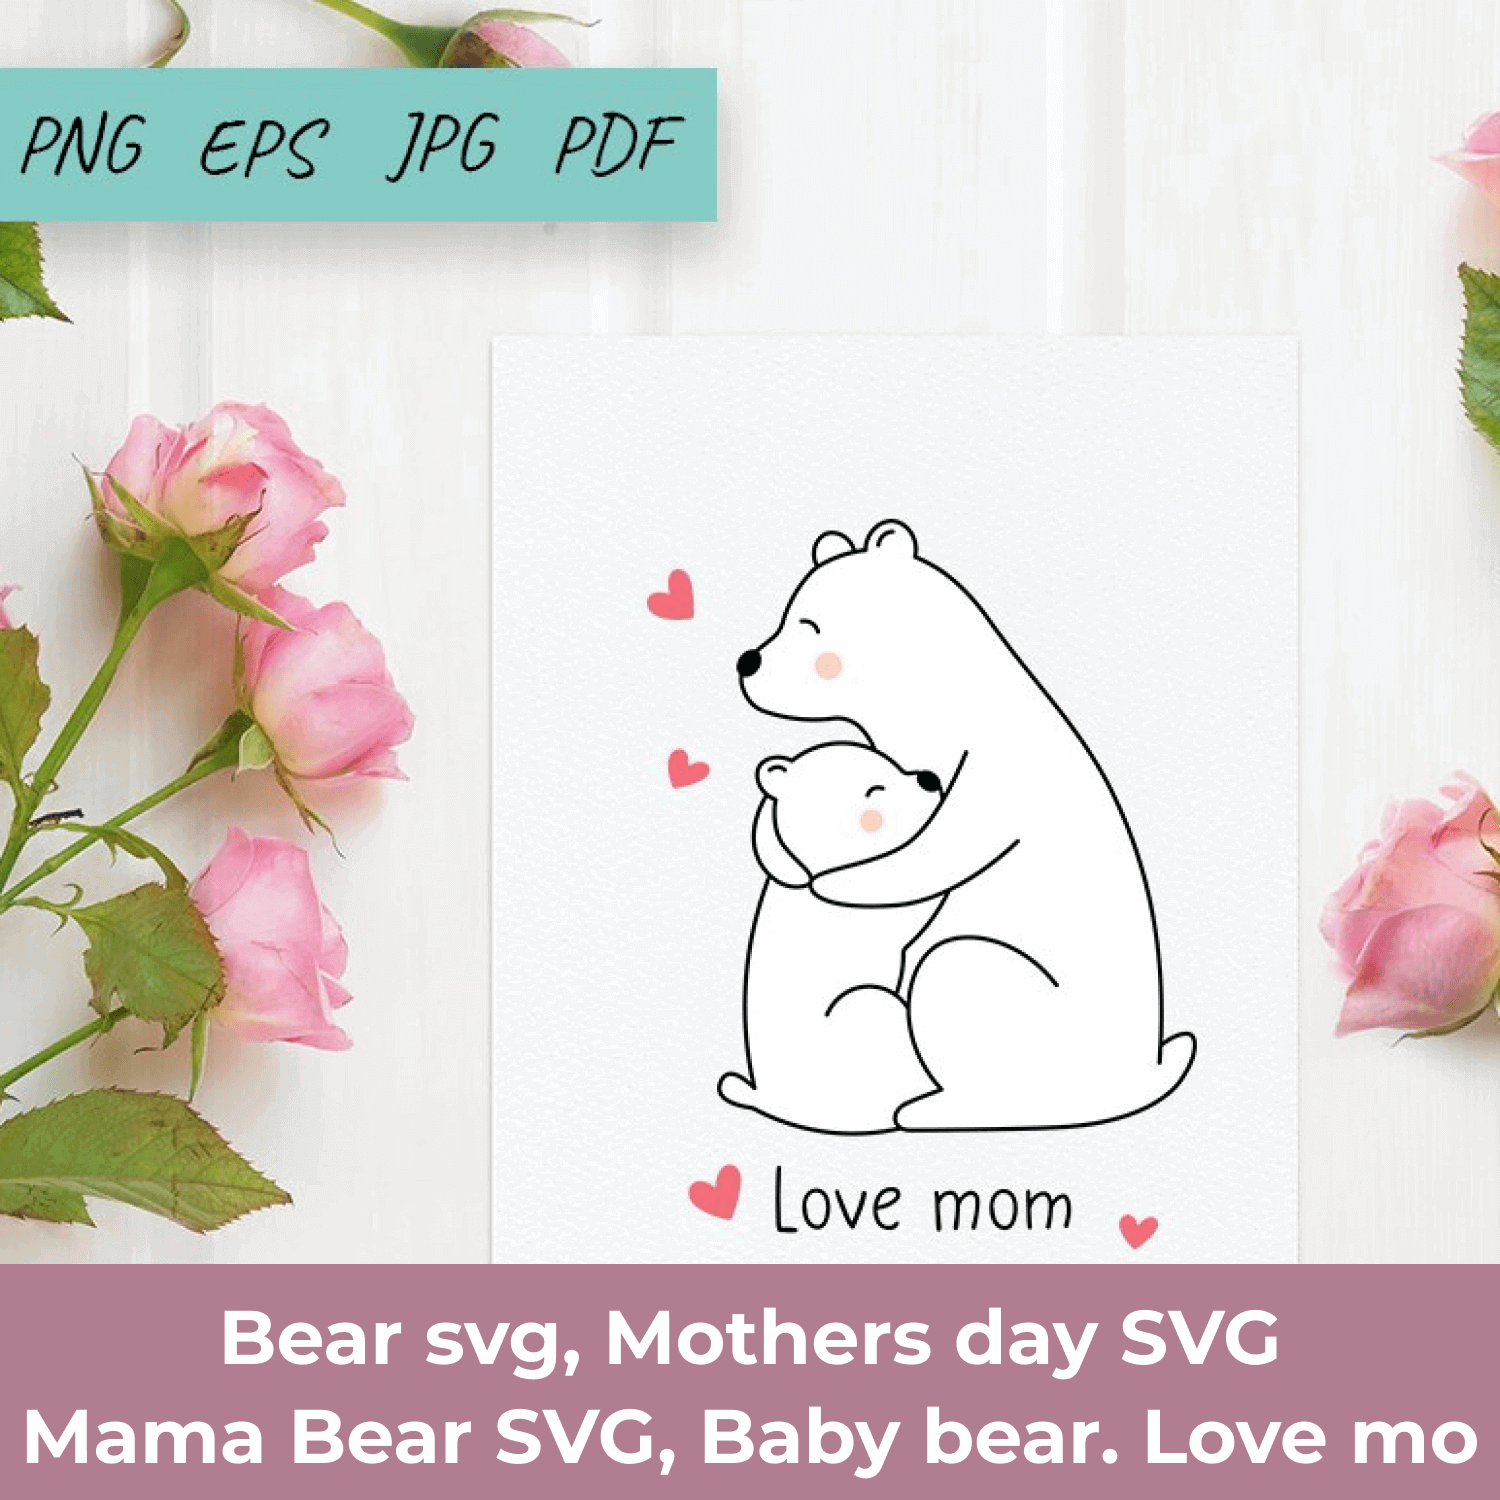 Bear SVG, Mothers Day SVG, Mama Bear SVG, Baby Bear, Love Mo on White Background with Roses.